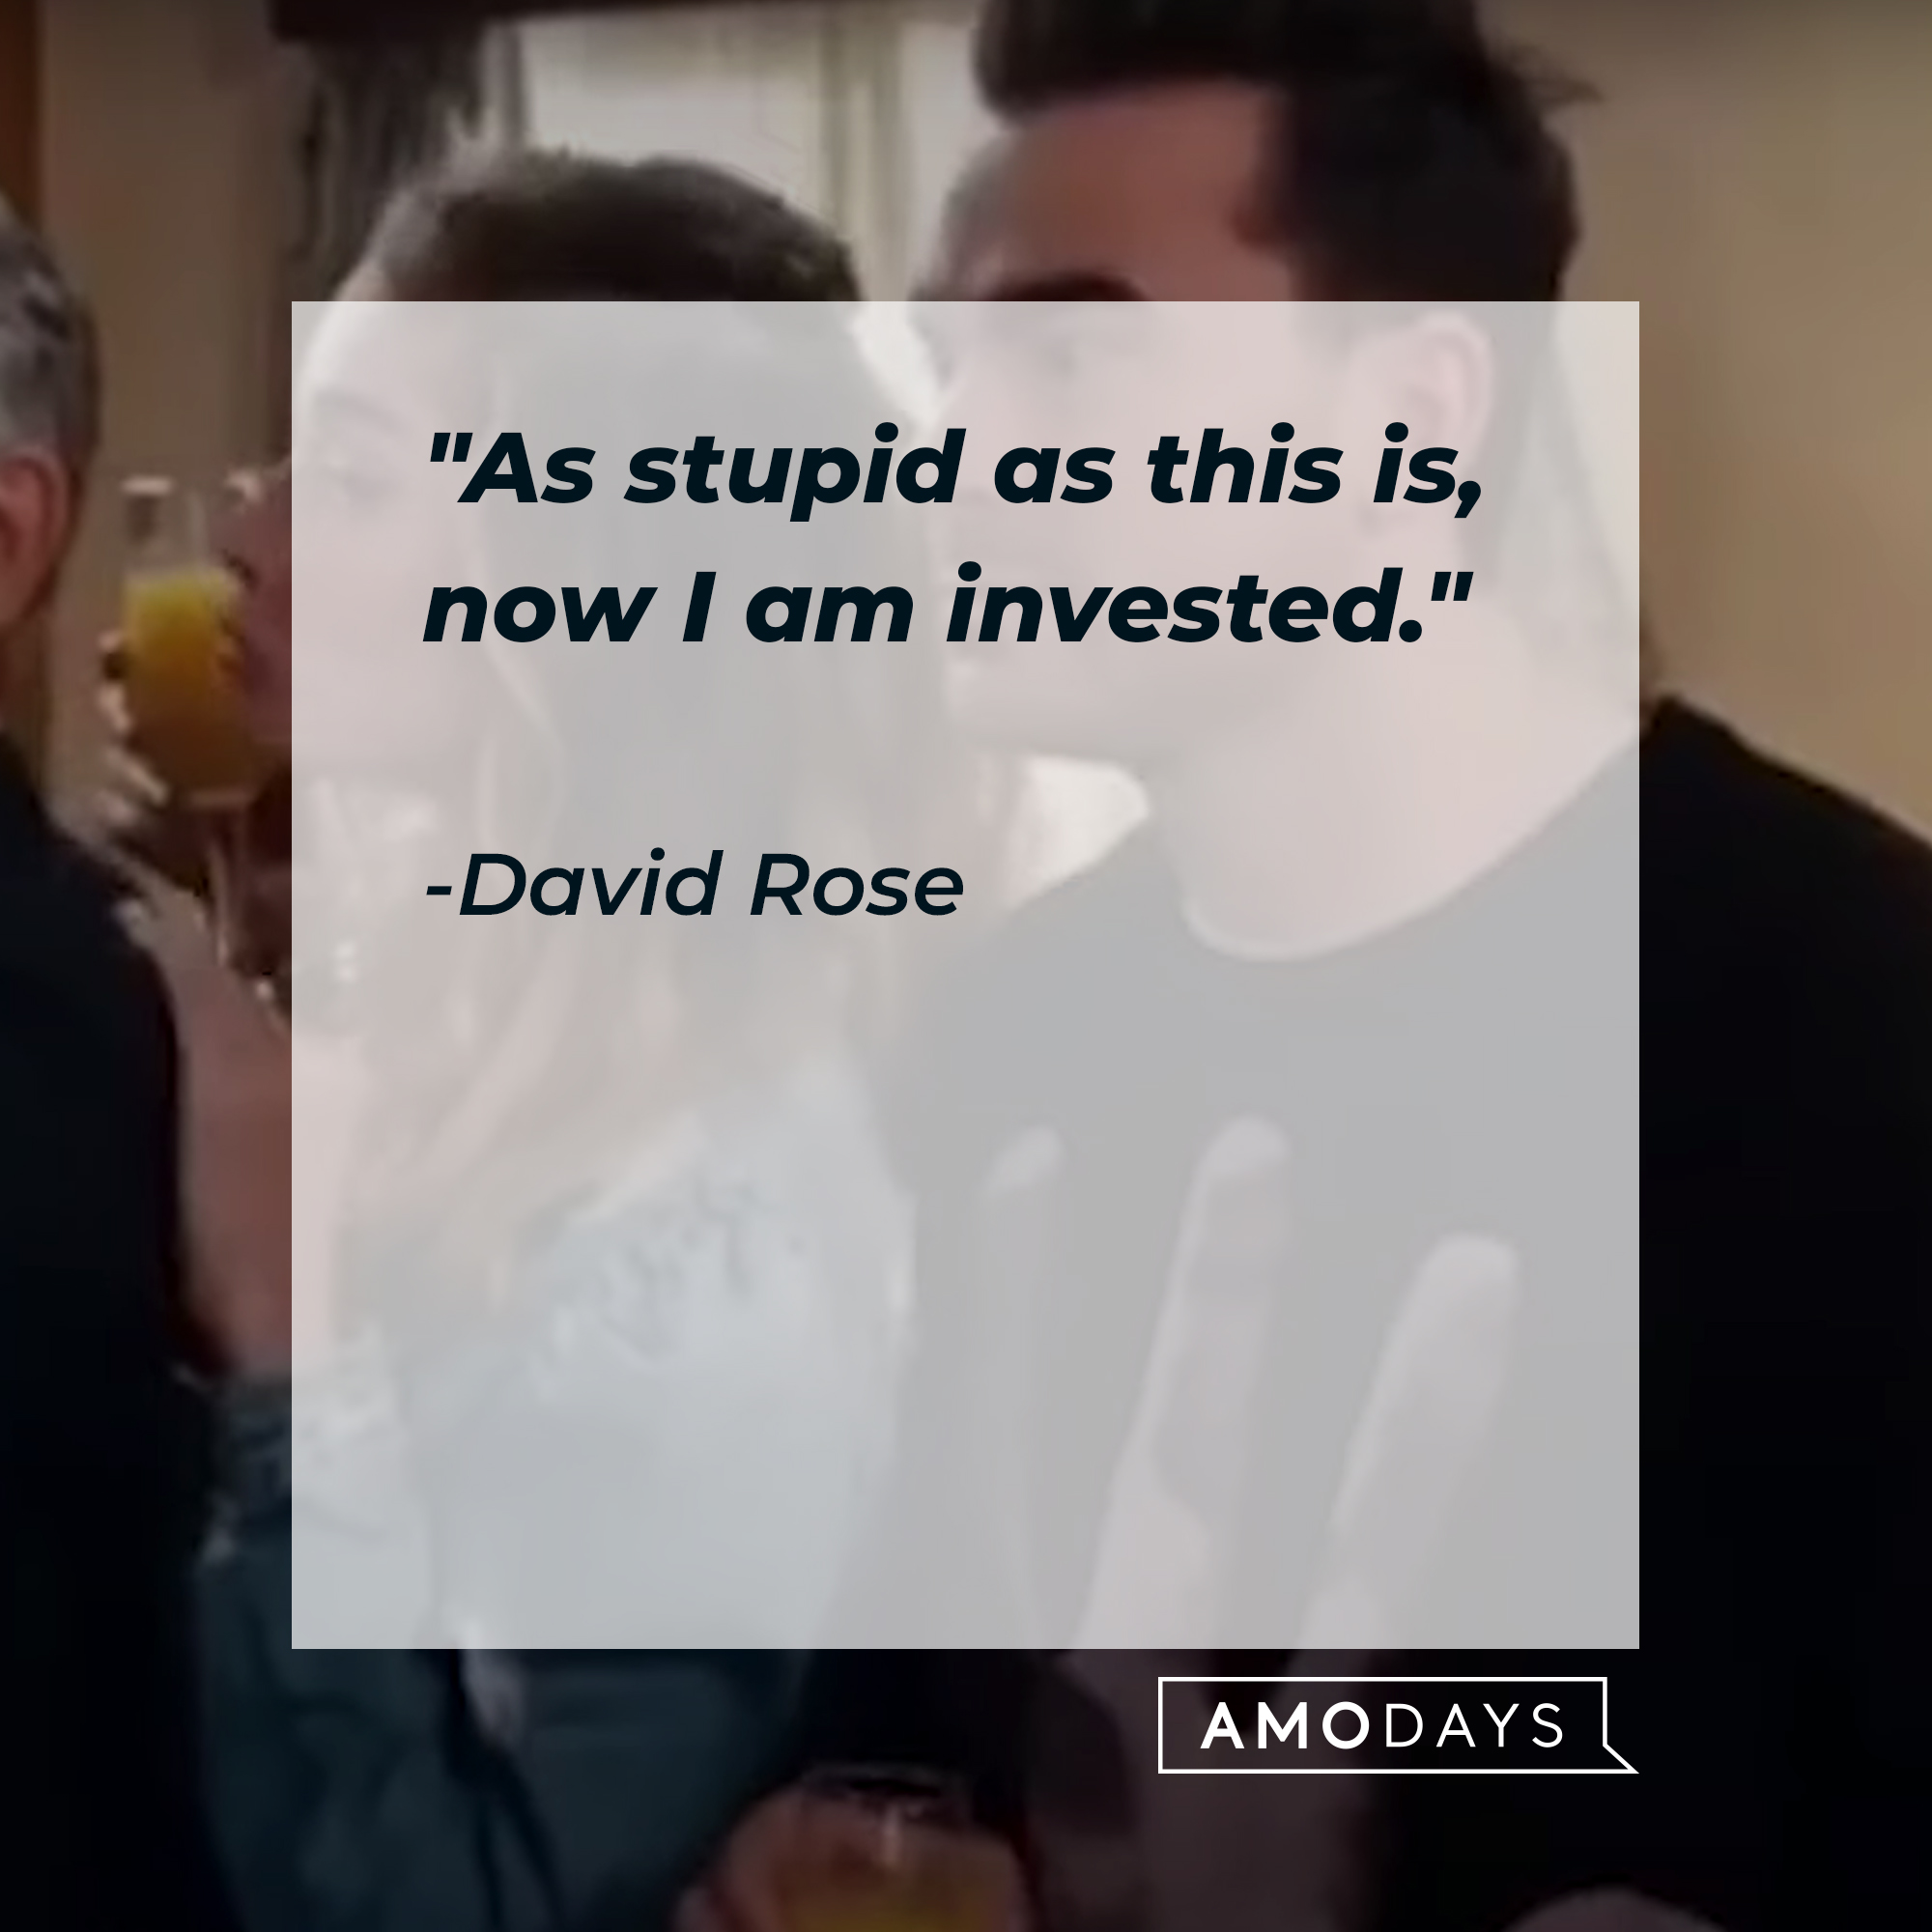 A photo of David Rose with the quote, "As stupid as this is, now I am invested." | Source: YouTube/PopTVVideo